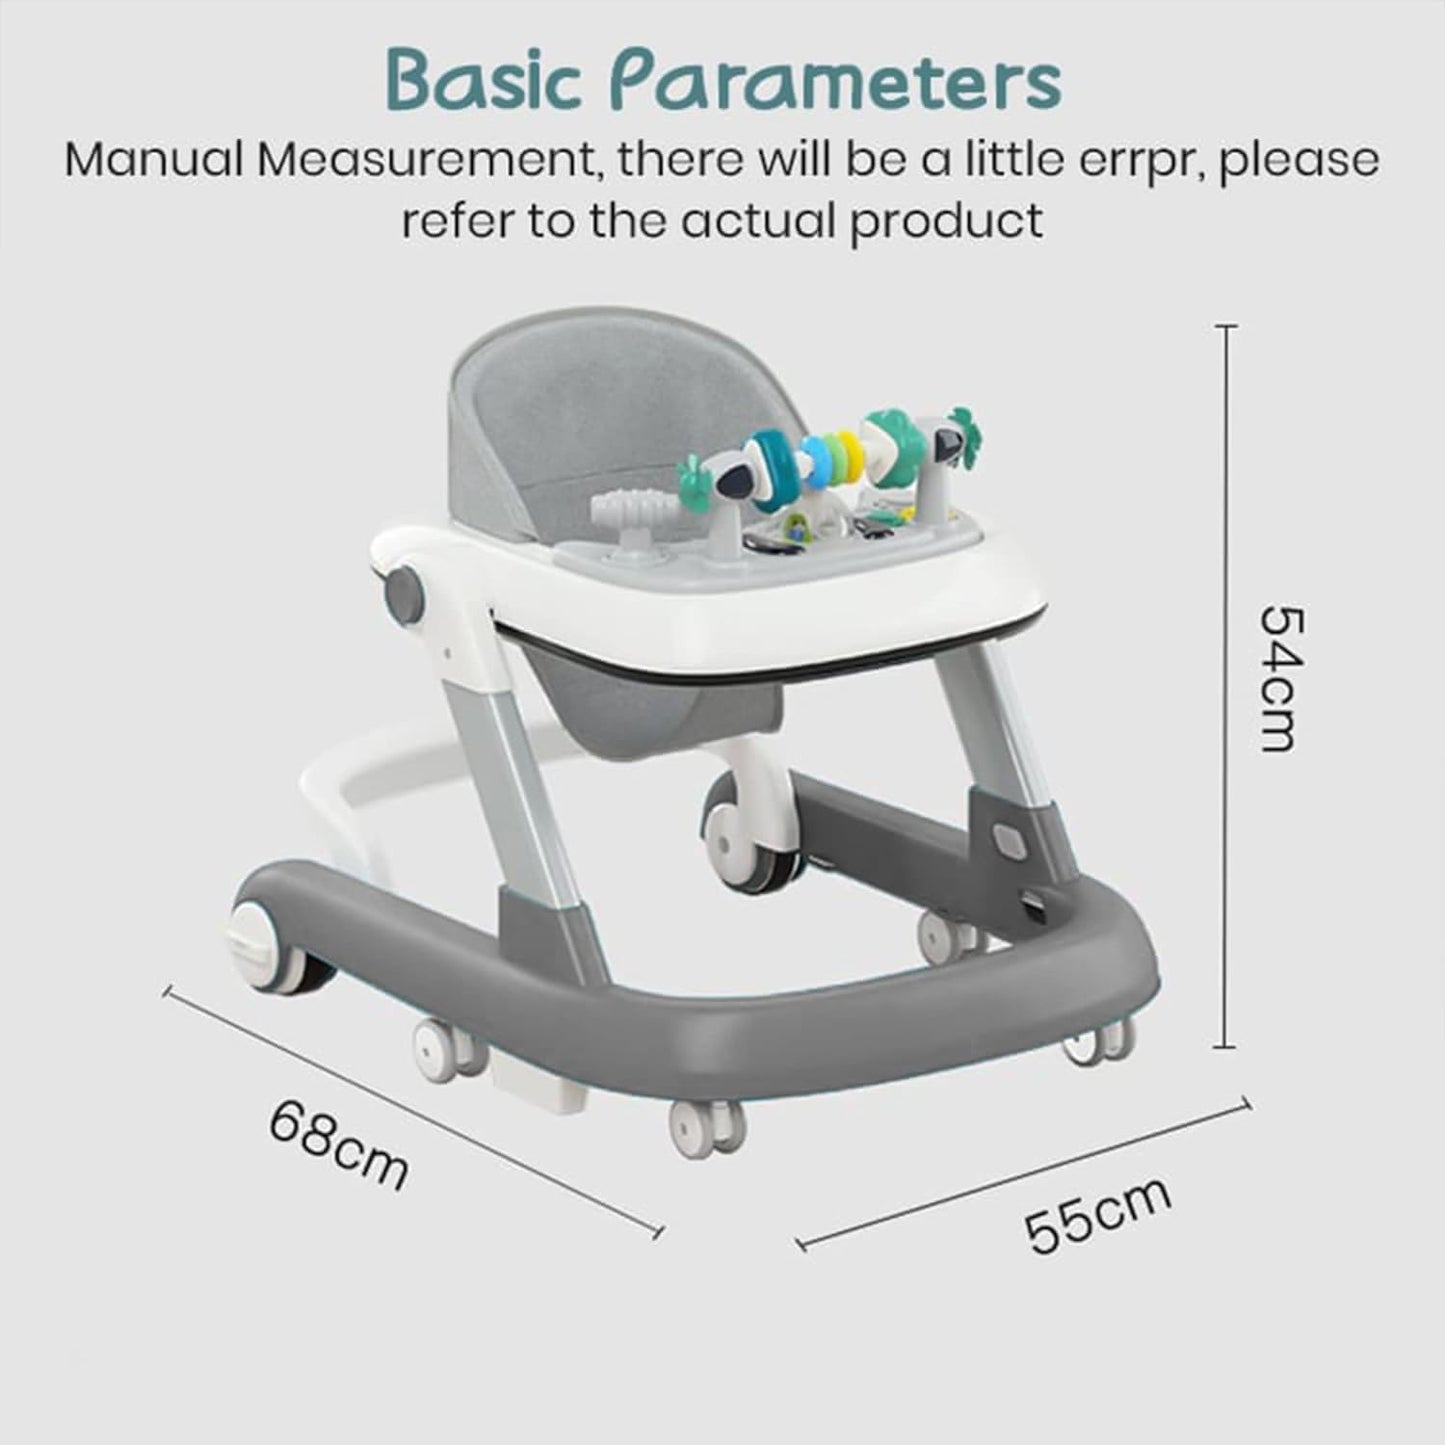 2-in-1 Tiny Baby Walker: Adjustable, Musical, and Safe